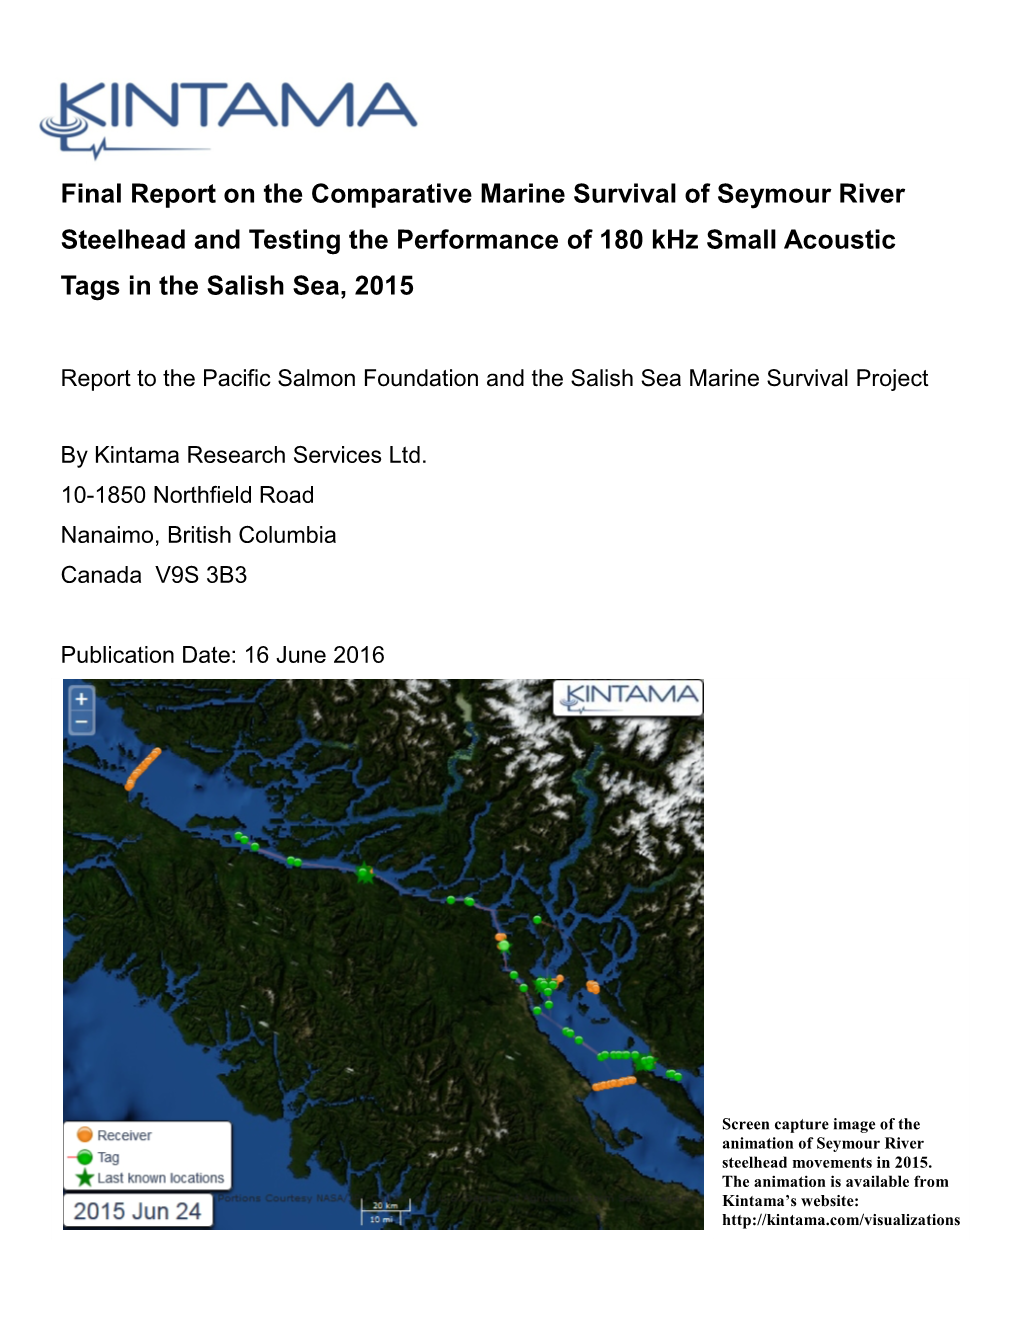 Final Report on the Comparative Marine Survival of Seymour River Steelhead and Testing the Performance of 180 Khz Small Acoustic Tags in the Salish Sea, 2015